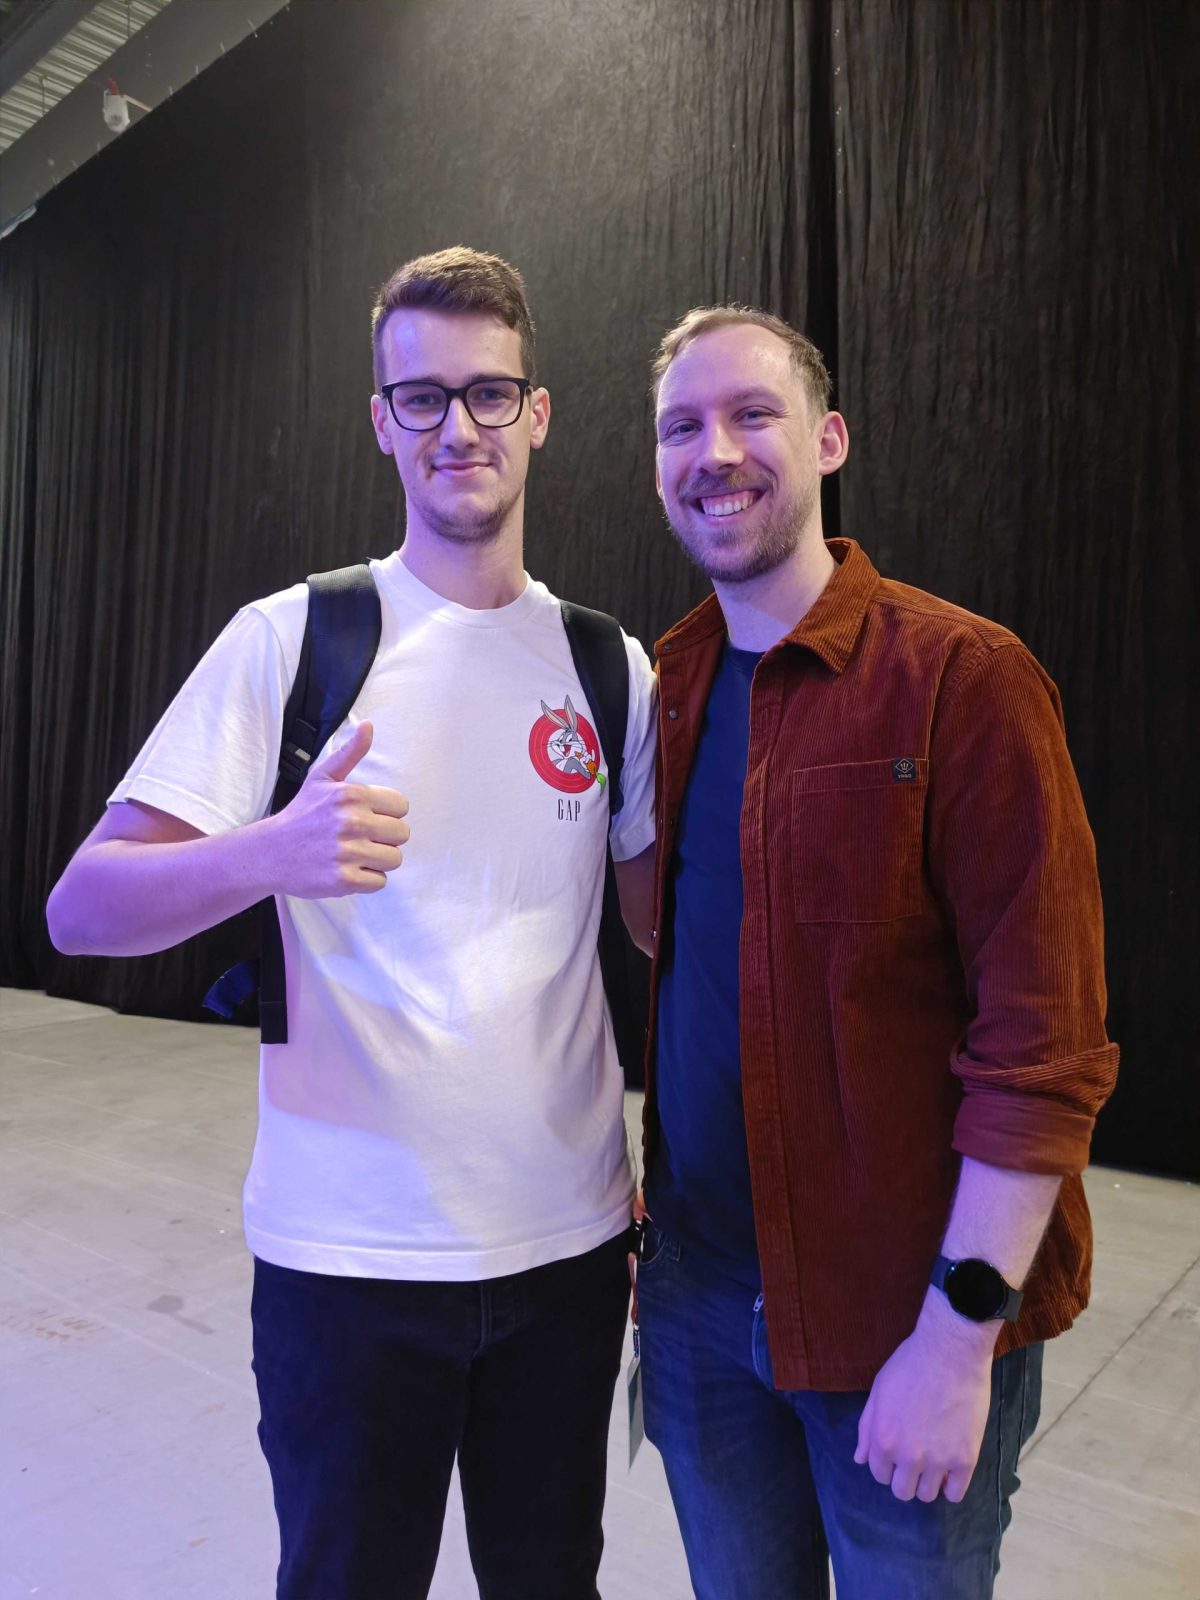 LPL caster Munchables (on the right) gave Jaxon's Zoran Papak (on the left) an interview at the LEC XPO during the LEC finals in Malmö, Sweden